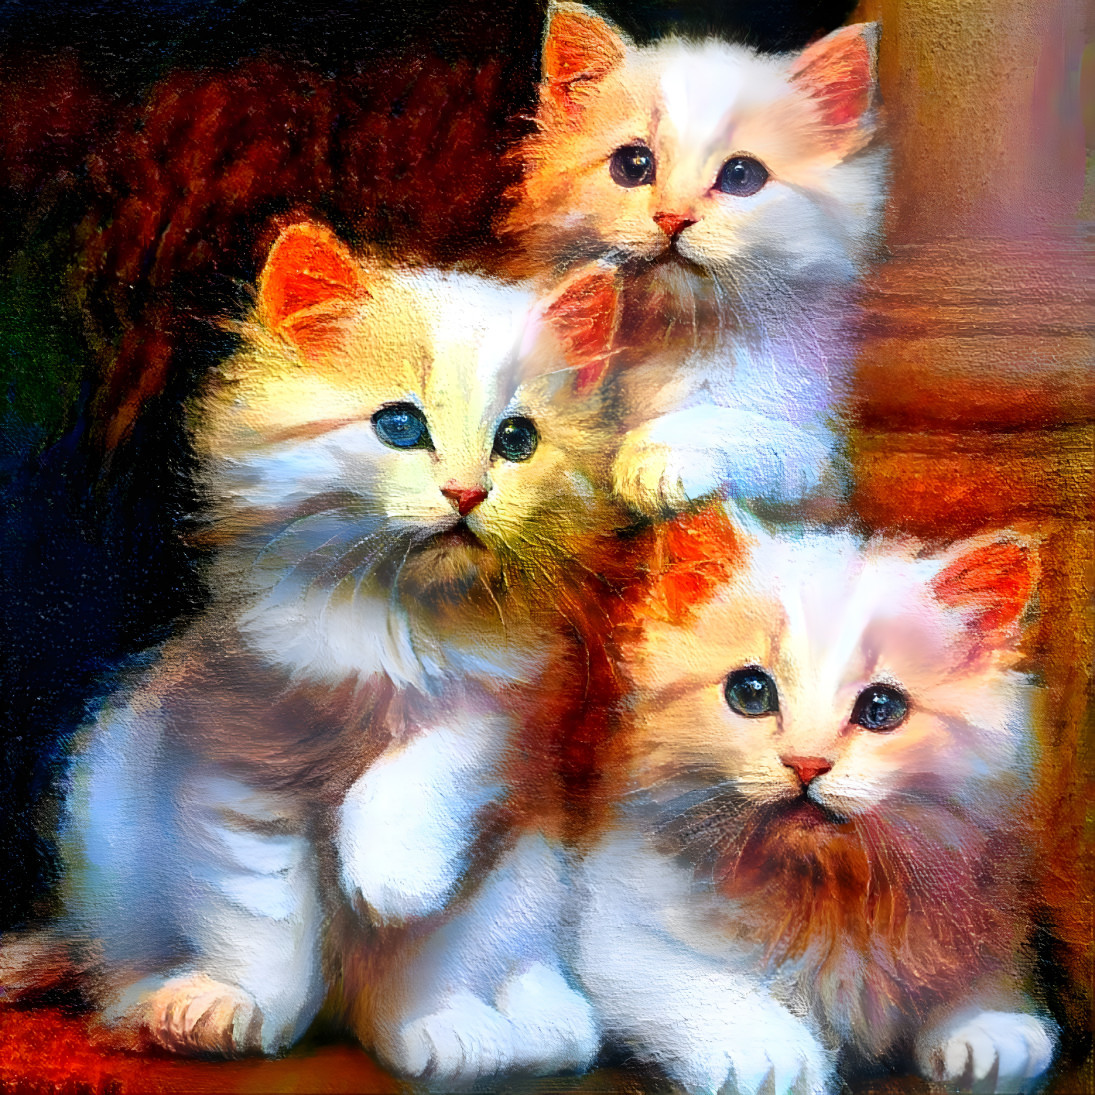 Kittens ... One, Two, Three